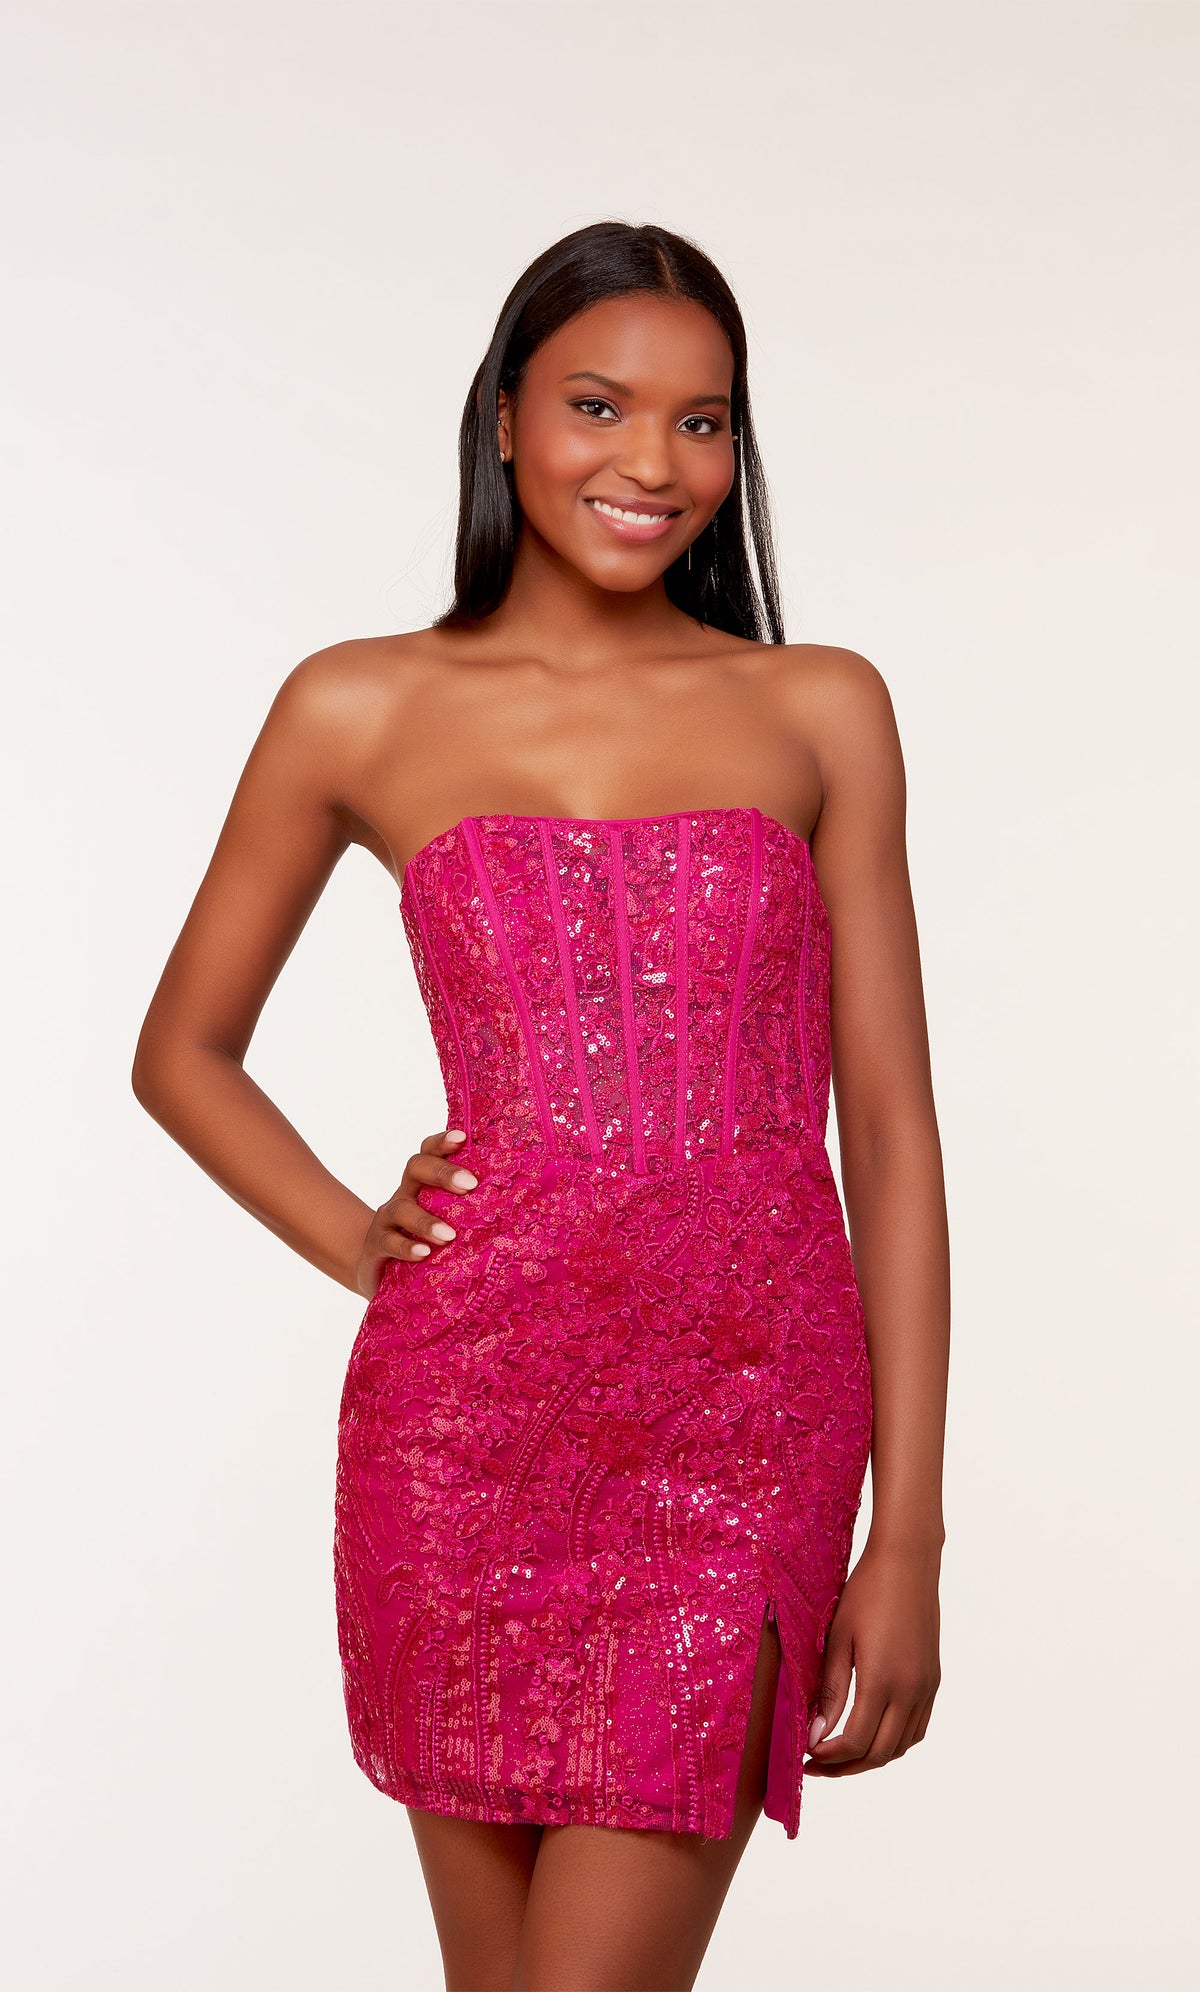 A short strapless corset dress with a sheer bodice adorned with an intricate lace overlay and a side slit. The dress was created in a rich raspberry color.